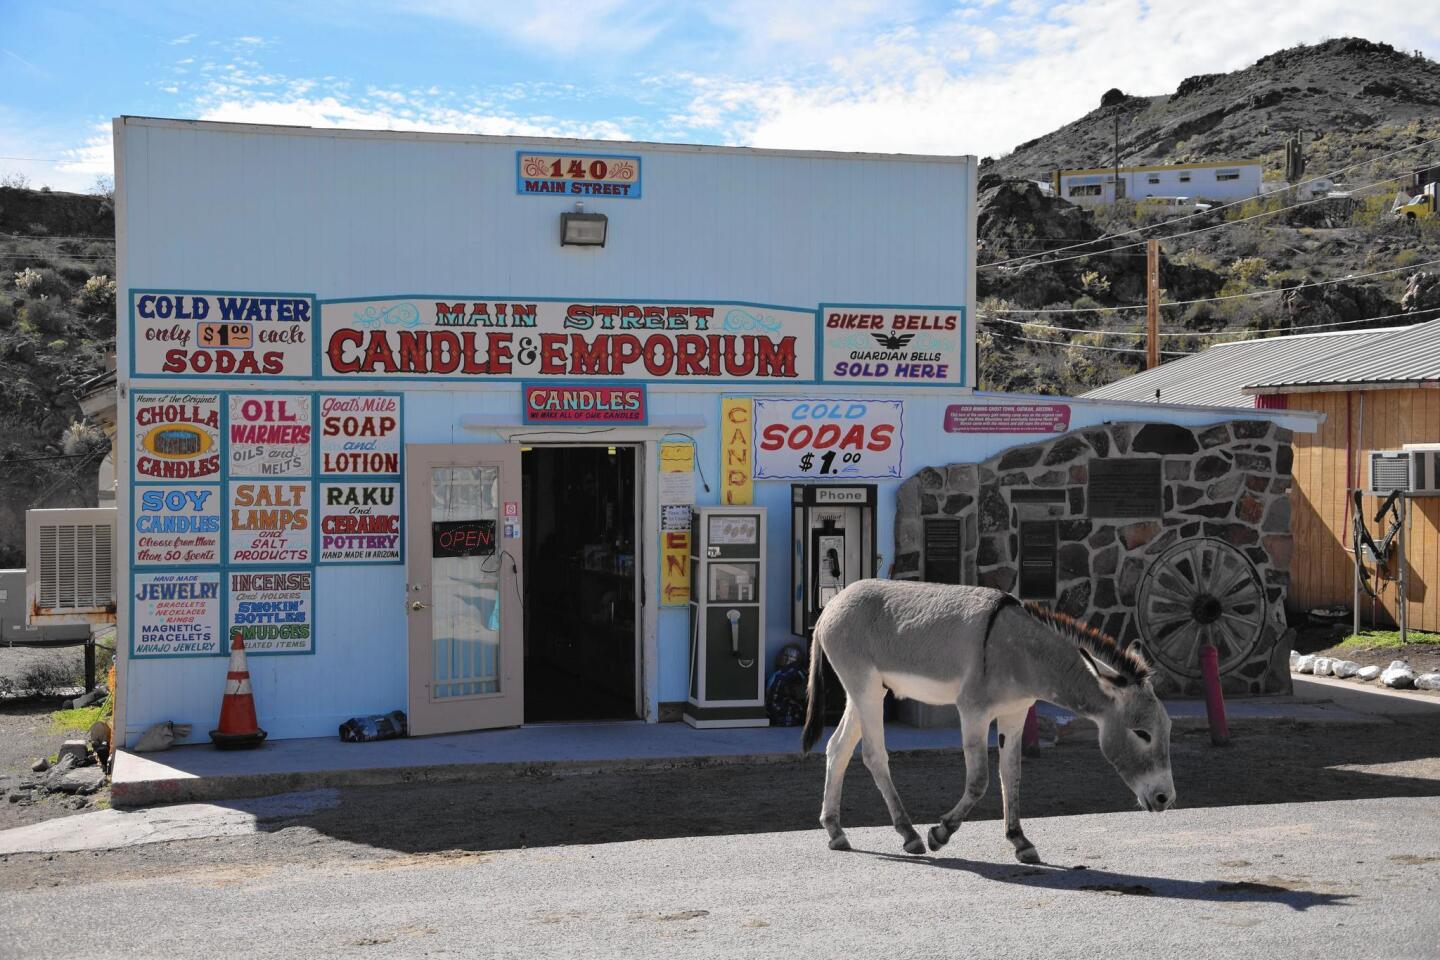 The most famous residents of Oatman, Ariz., are the wild burros that roam freely between shops.